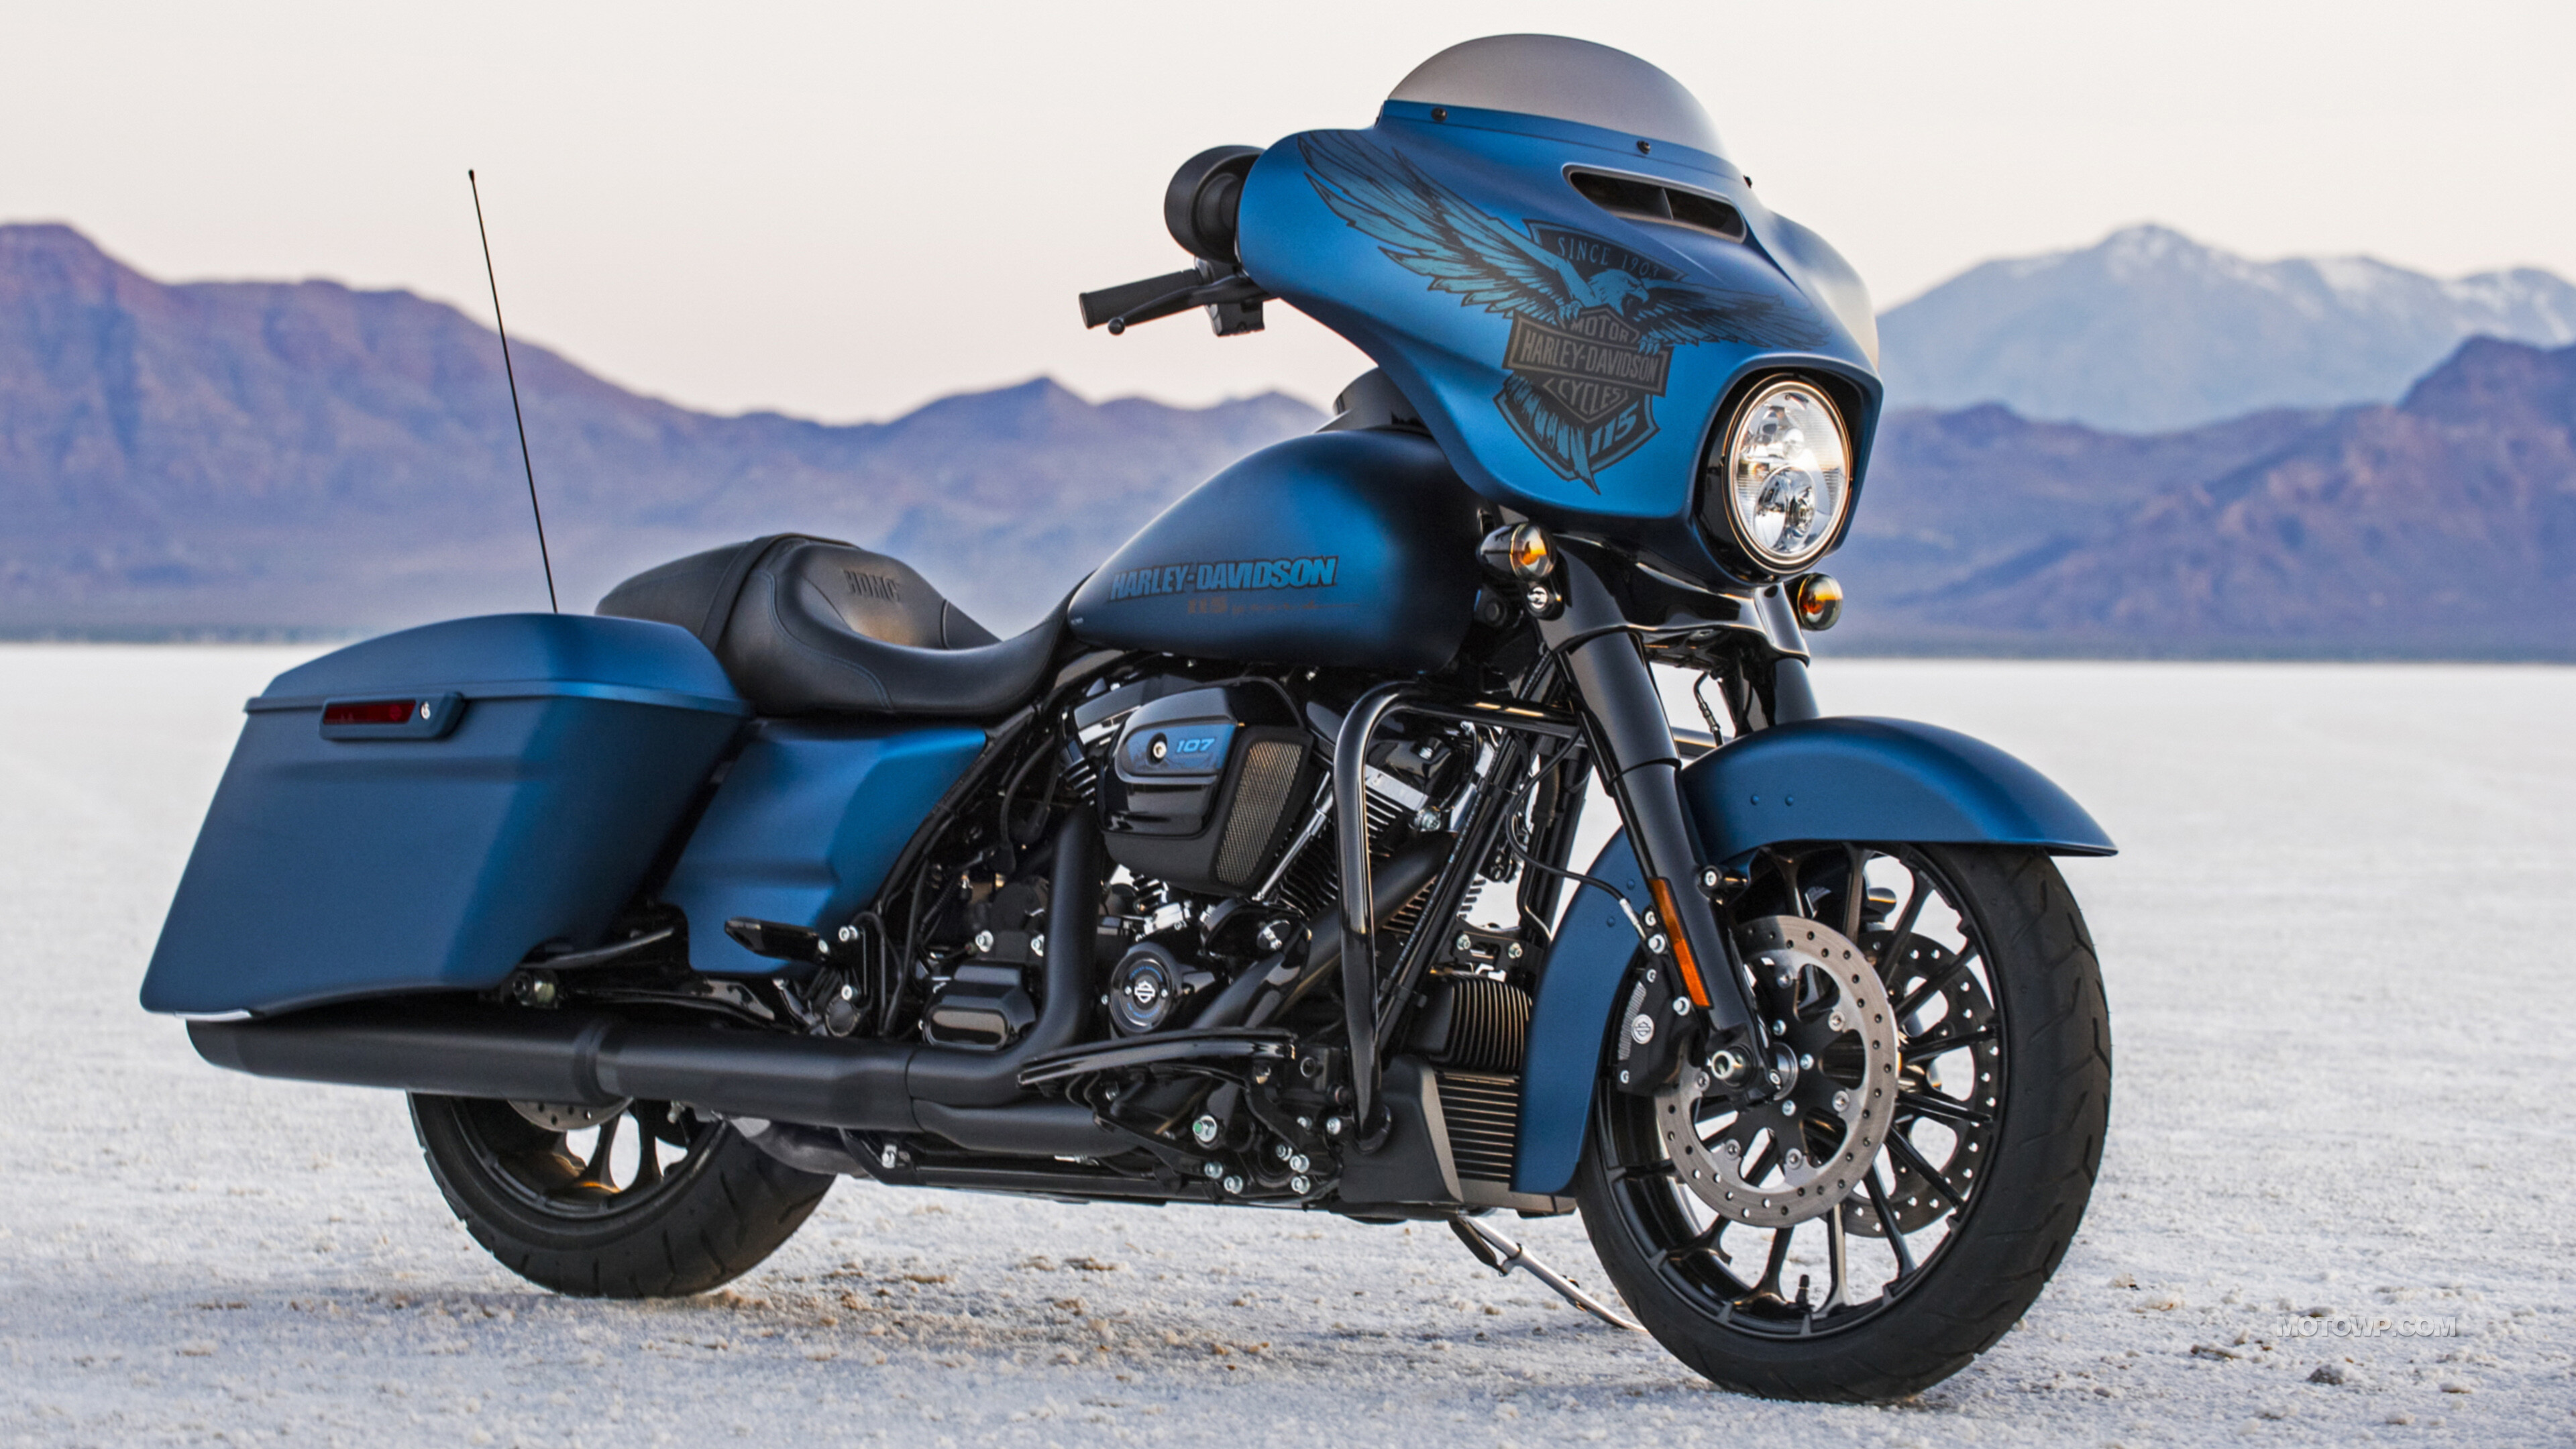 Harley-Davidson Glide: One of the best-selling Harley bikes since its inception in 2006, Motorcycles. 3840x2160 4K Background.